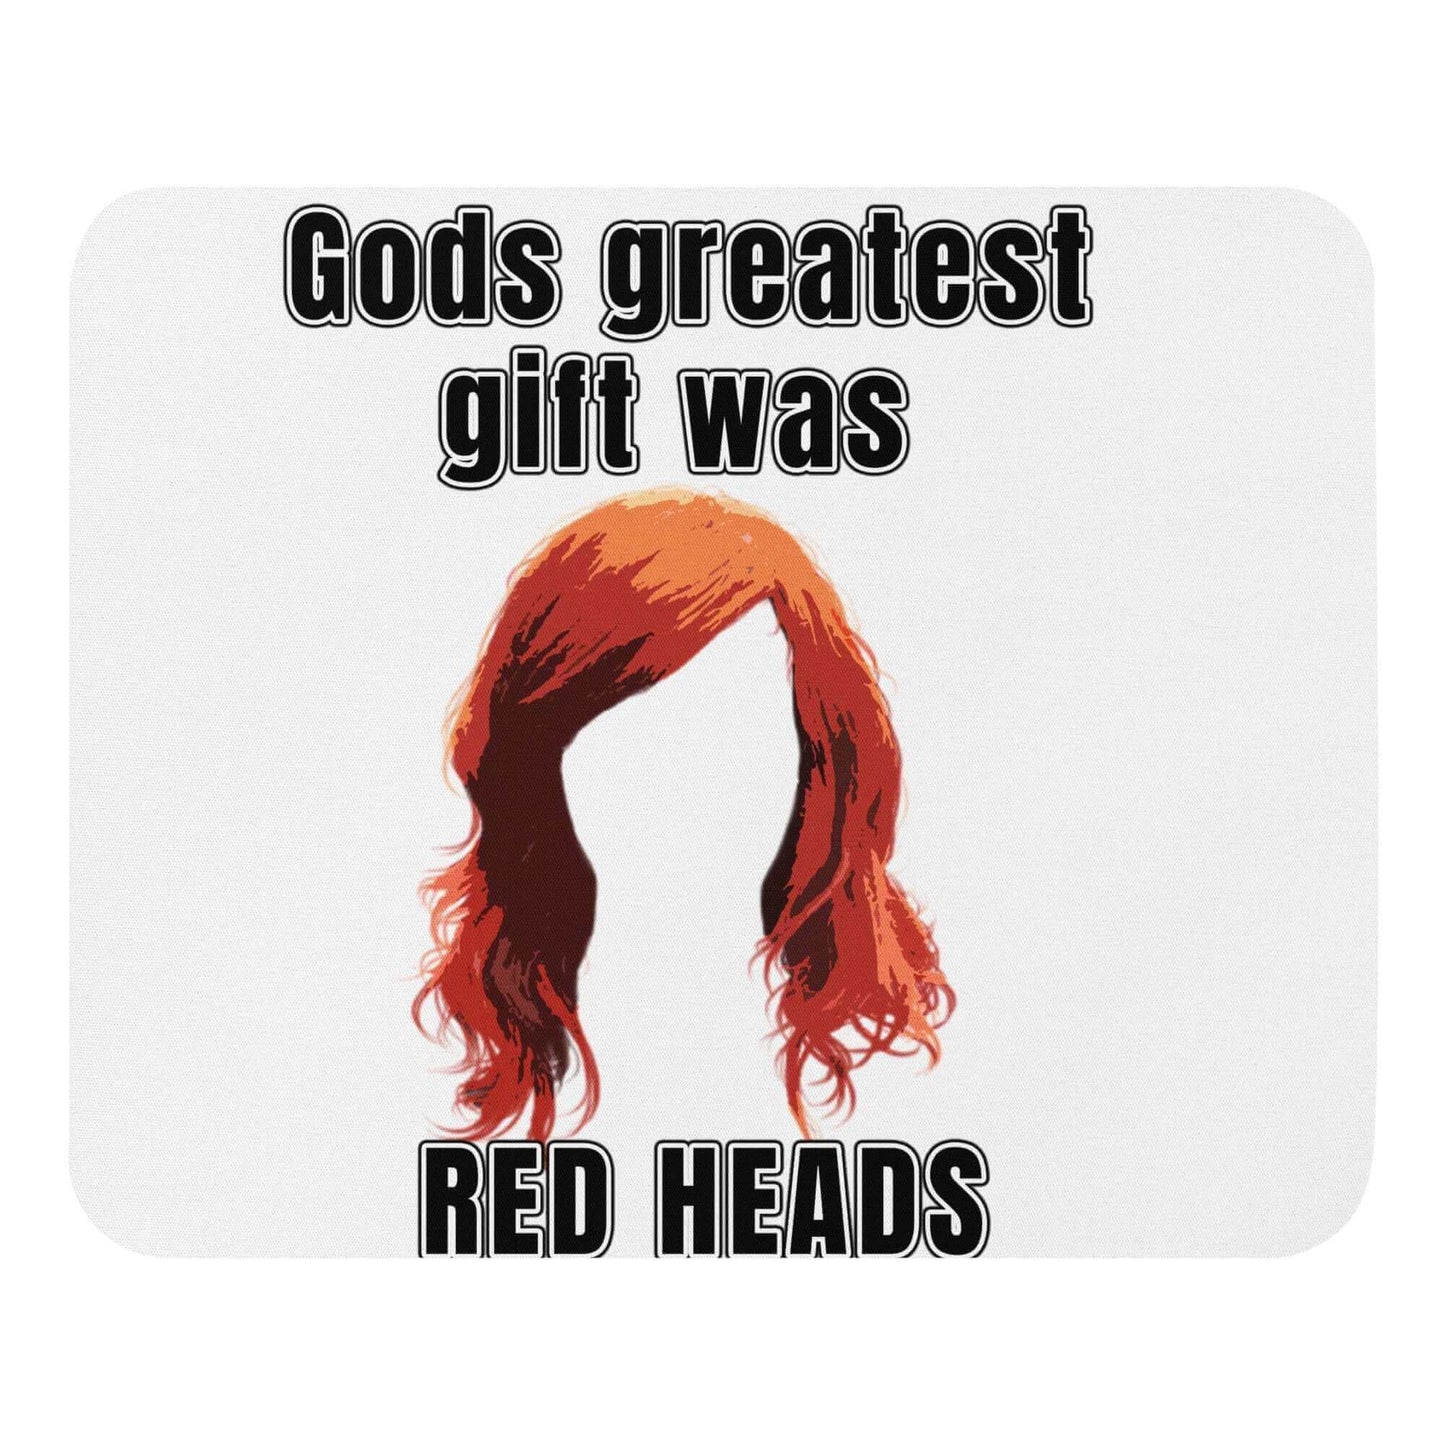 Gods greatest gift was RED HEADS - Mouse pad anniversary best lay christmas drapes match the curtains gift for mom gift for sister gift for wife giger god holiday no soul red head